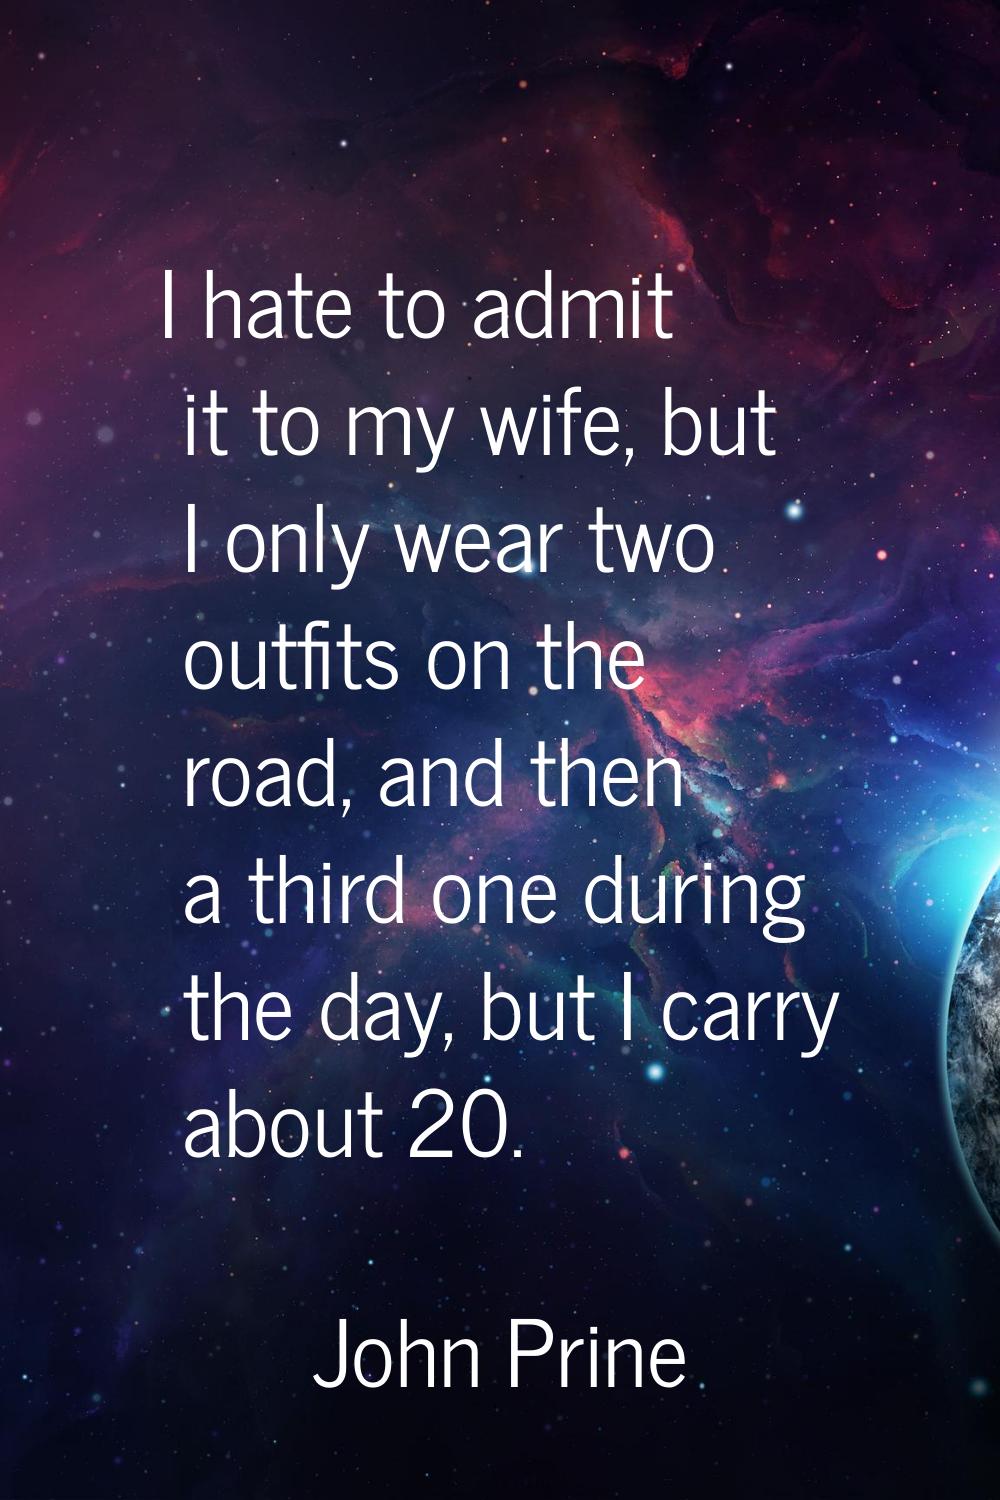 I hate to admit it to my wife, but I only wear two outfits on the road, and then a third one during